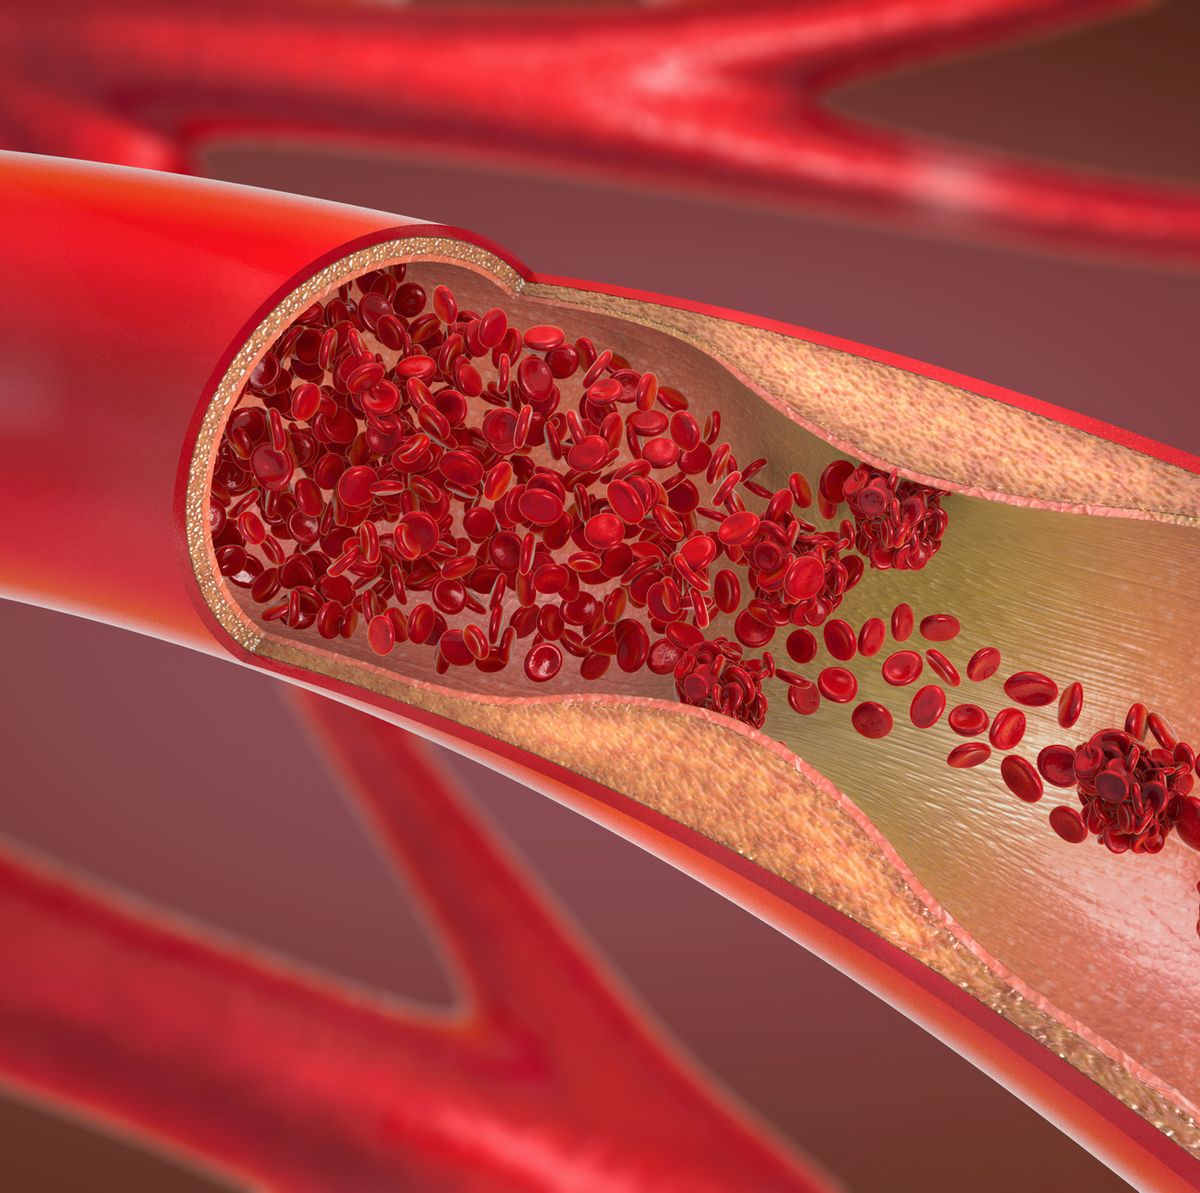 Blood Clot Treatment and Causes